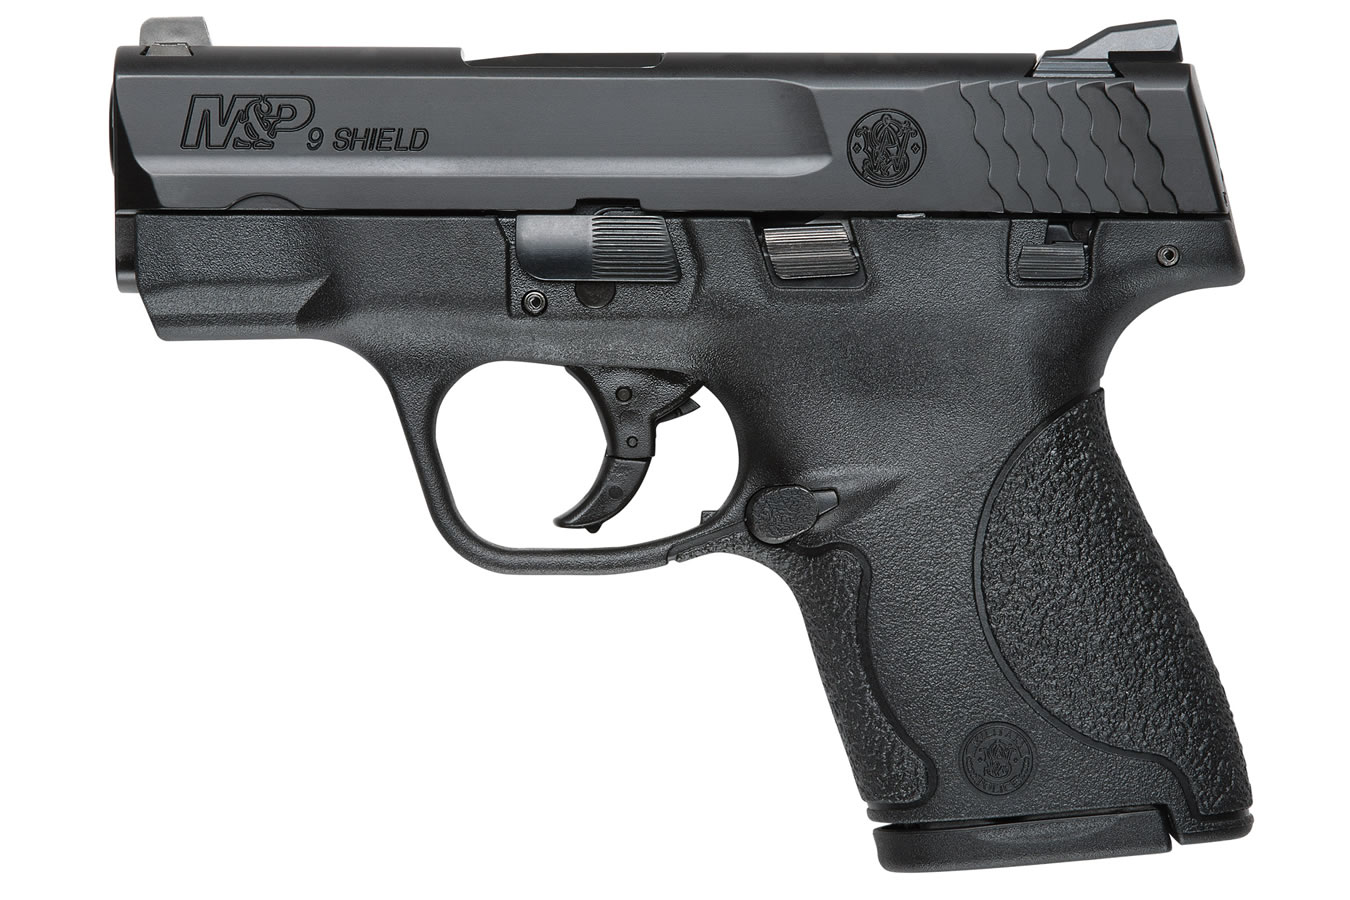 SMITH AND WESSON MP9 SHIELD 9MM PISTOL